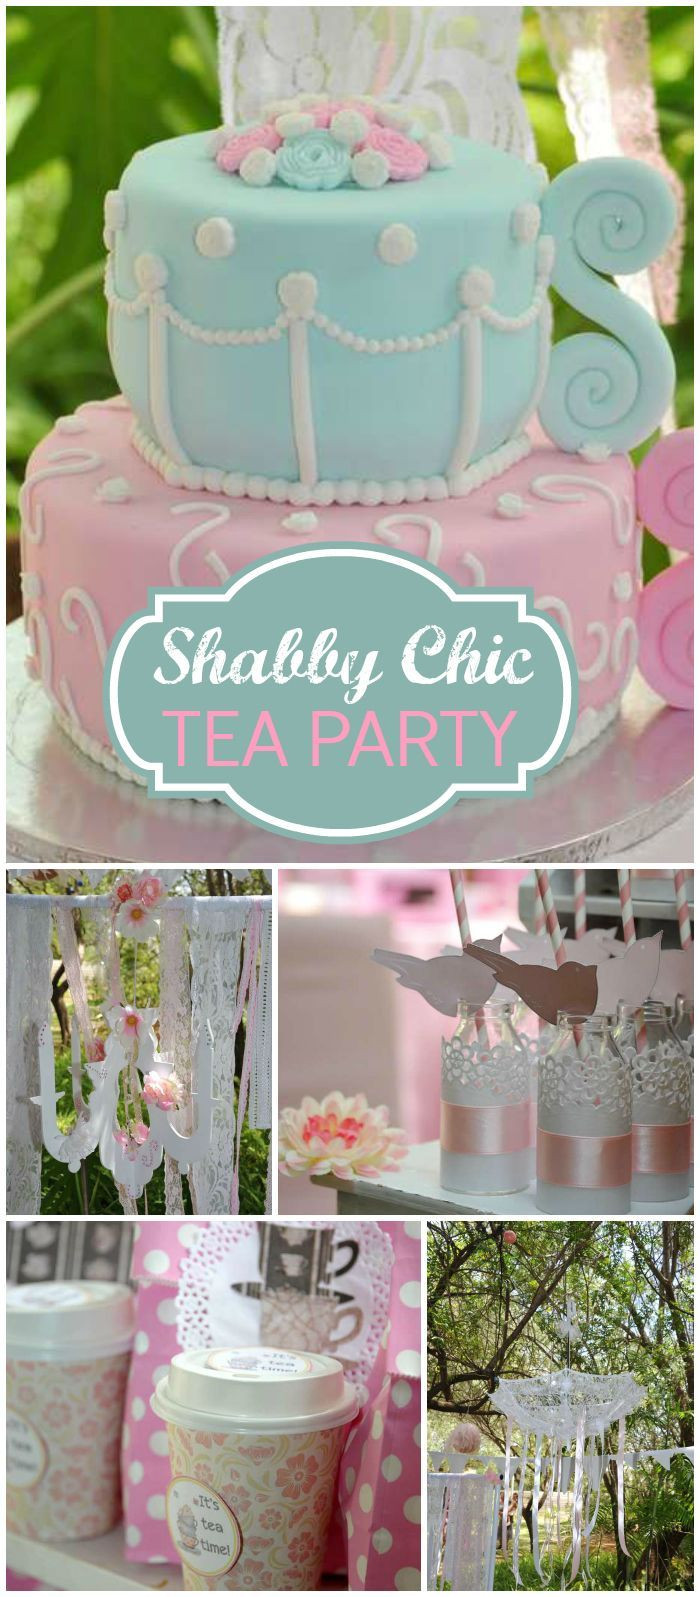 Tea Party Themed Birthday Party Ideas
 Such a lovely and elegant high tea birthday party Lots of